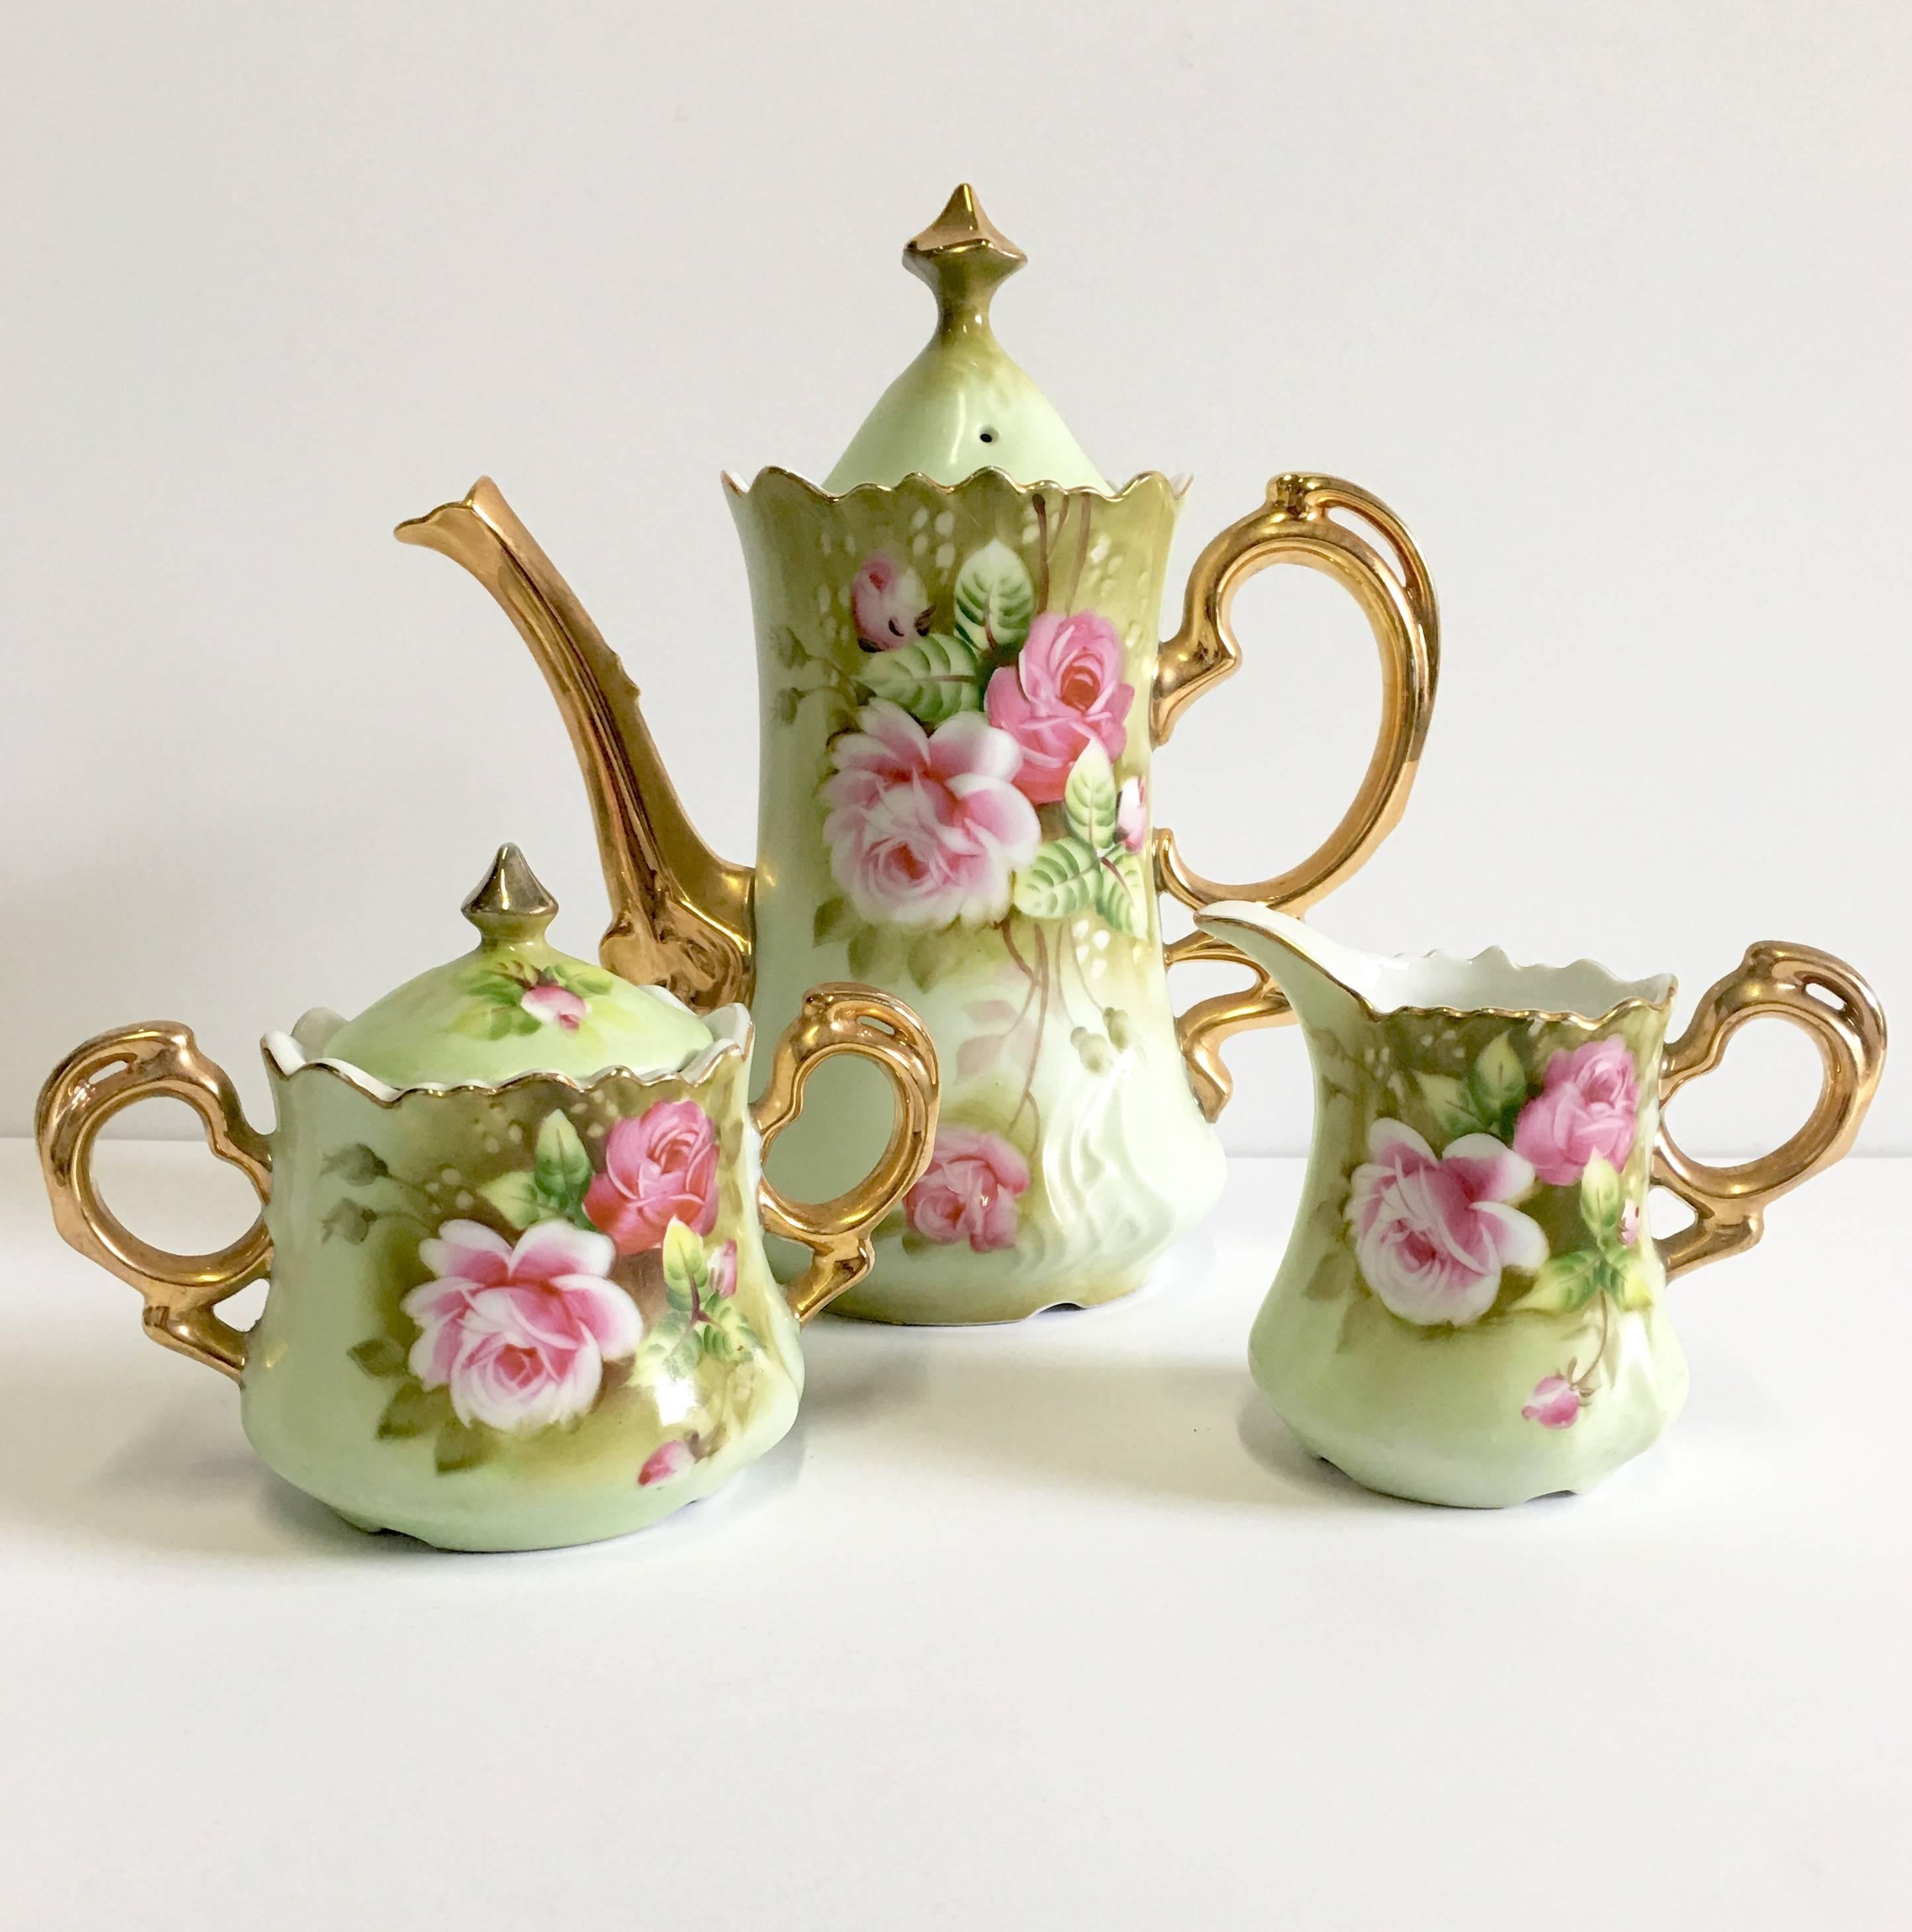 Beautiful mint green, pink and 22-karat gold adorned tea/ coffee service. Set includes, lidded tea/coffee pot, lidded sugar bowl, handled creamers and six tea/coffee cups and saucers. Hand-painted, each piece is signed on the underside, Lefton